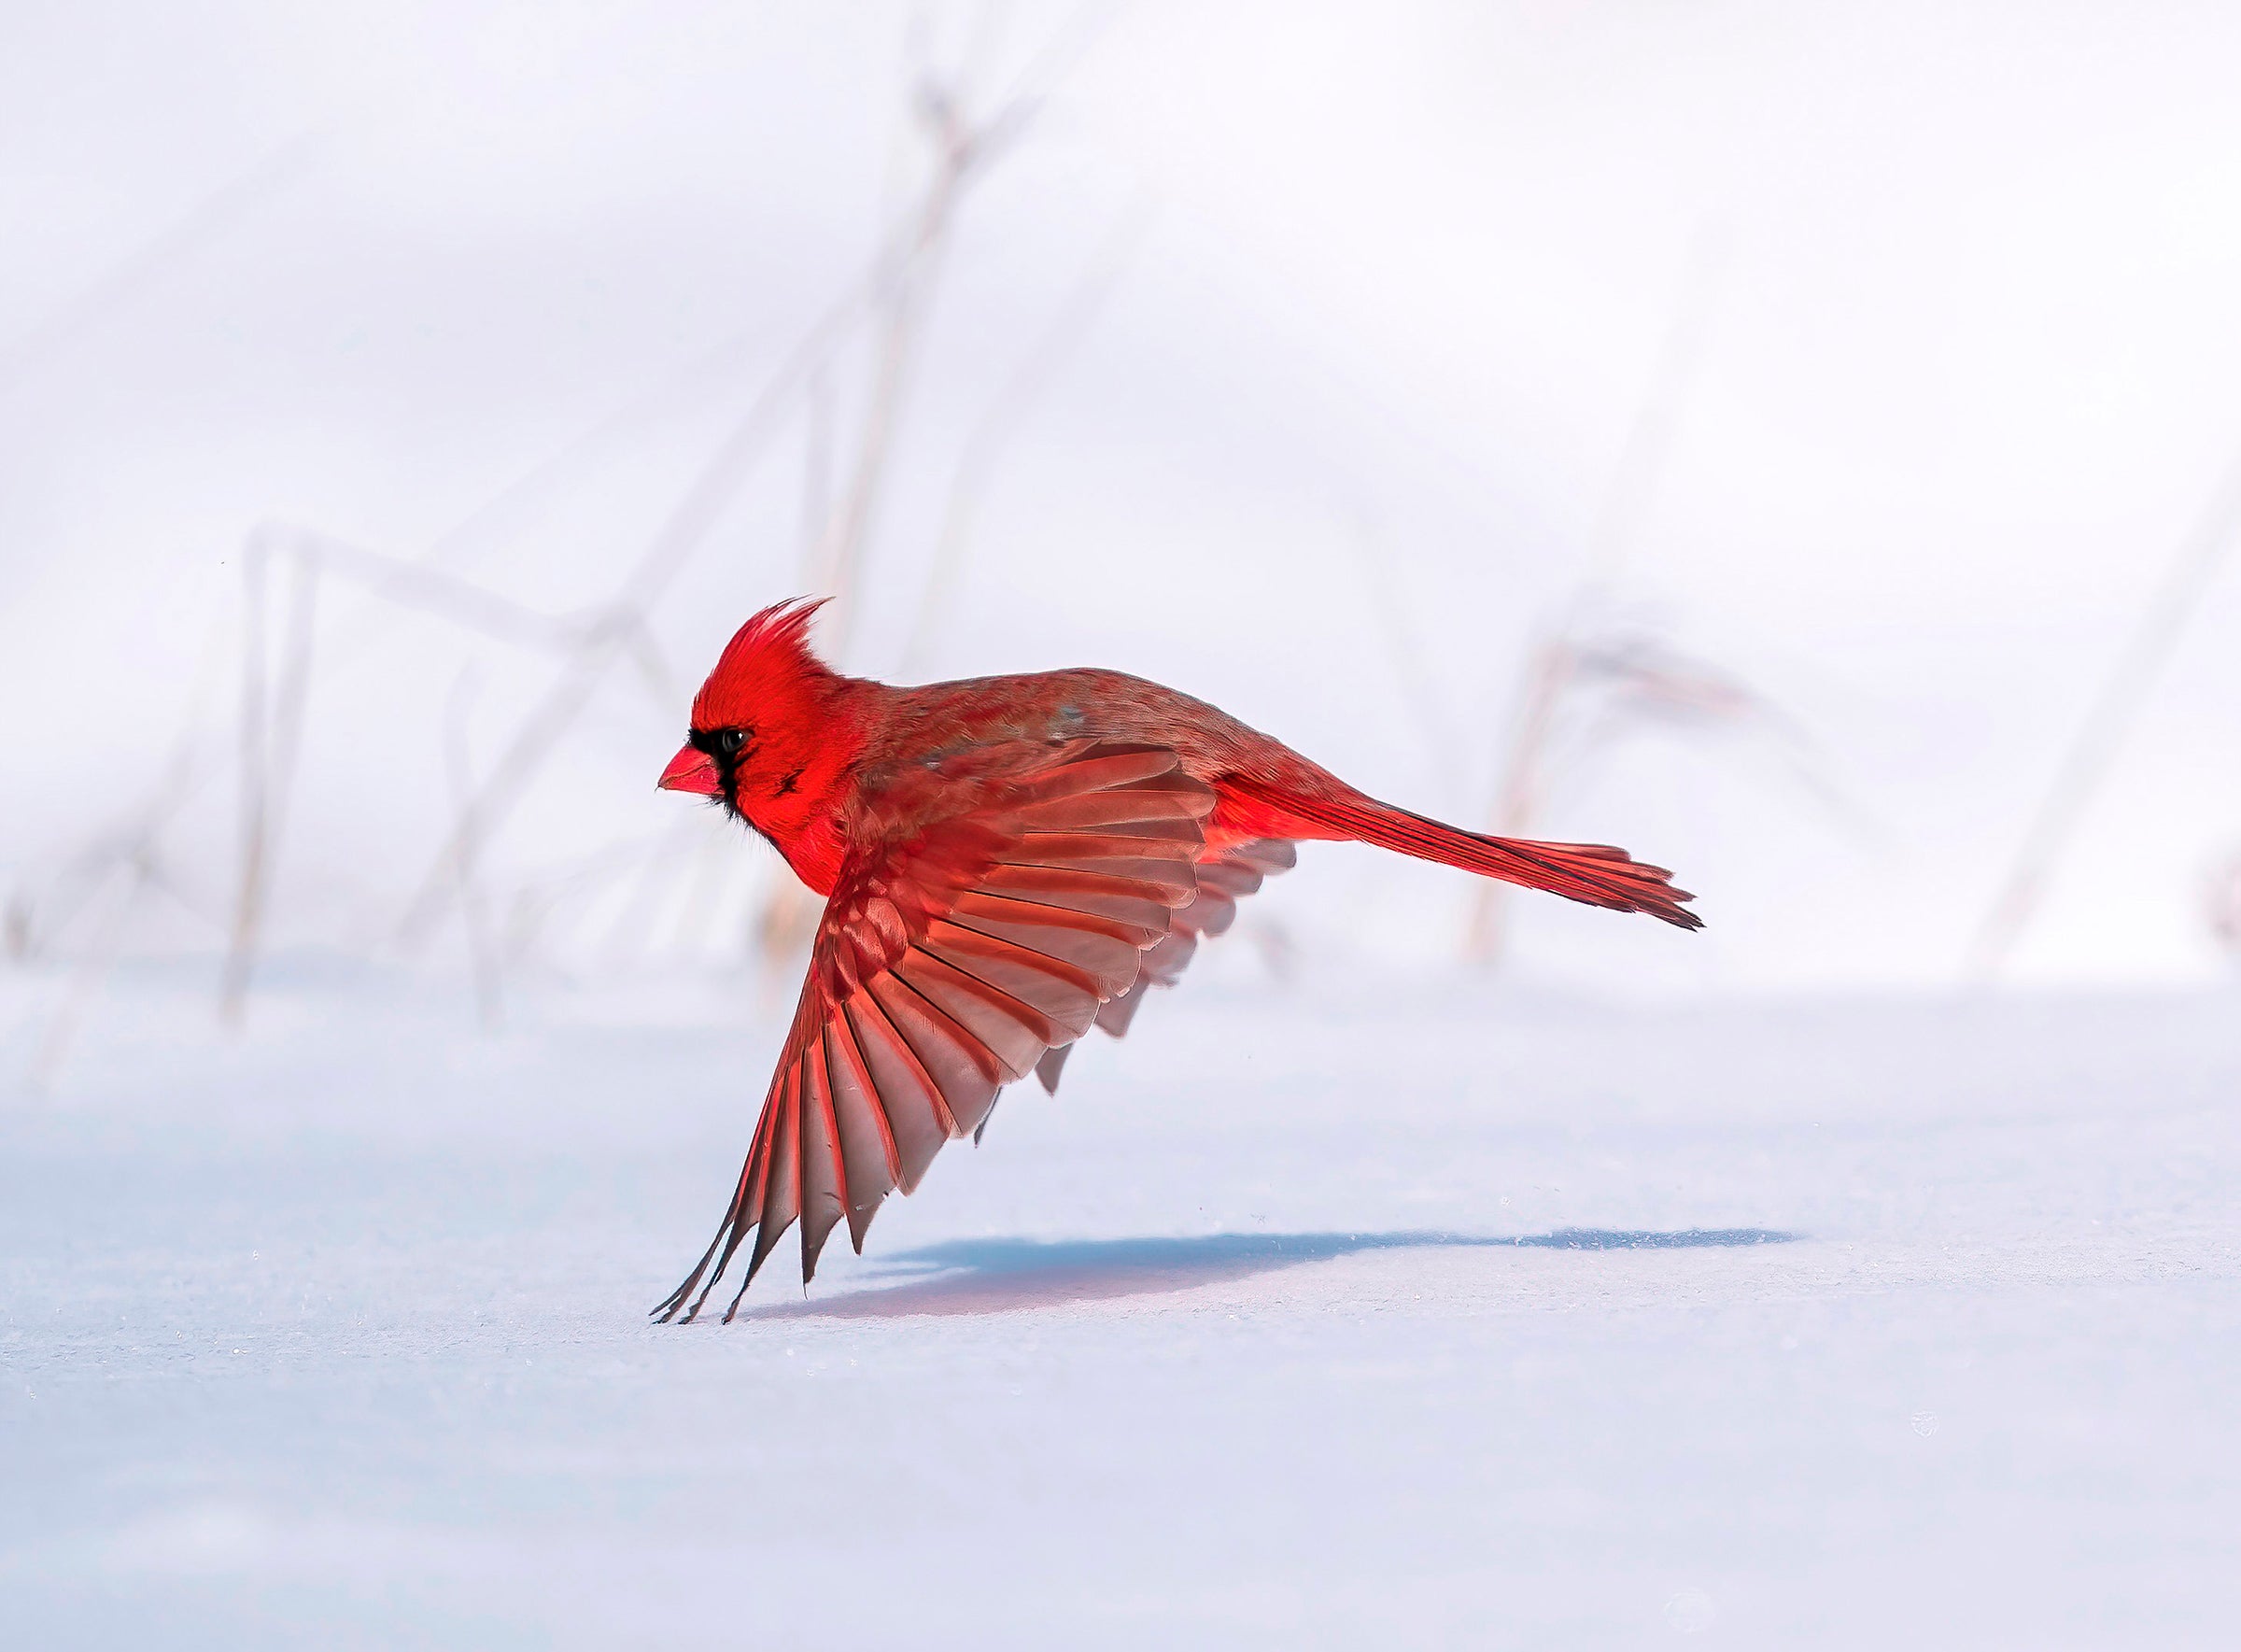 A red male Northern Cardinal seems to float above the snowy ground,the crest feathers on its head blown backward in the wind as it flies in profile in front of gray plant stalks. The bird’s three wing feathers touch the white carpet of snow, its shadow connecting below.